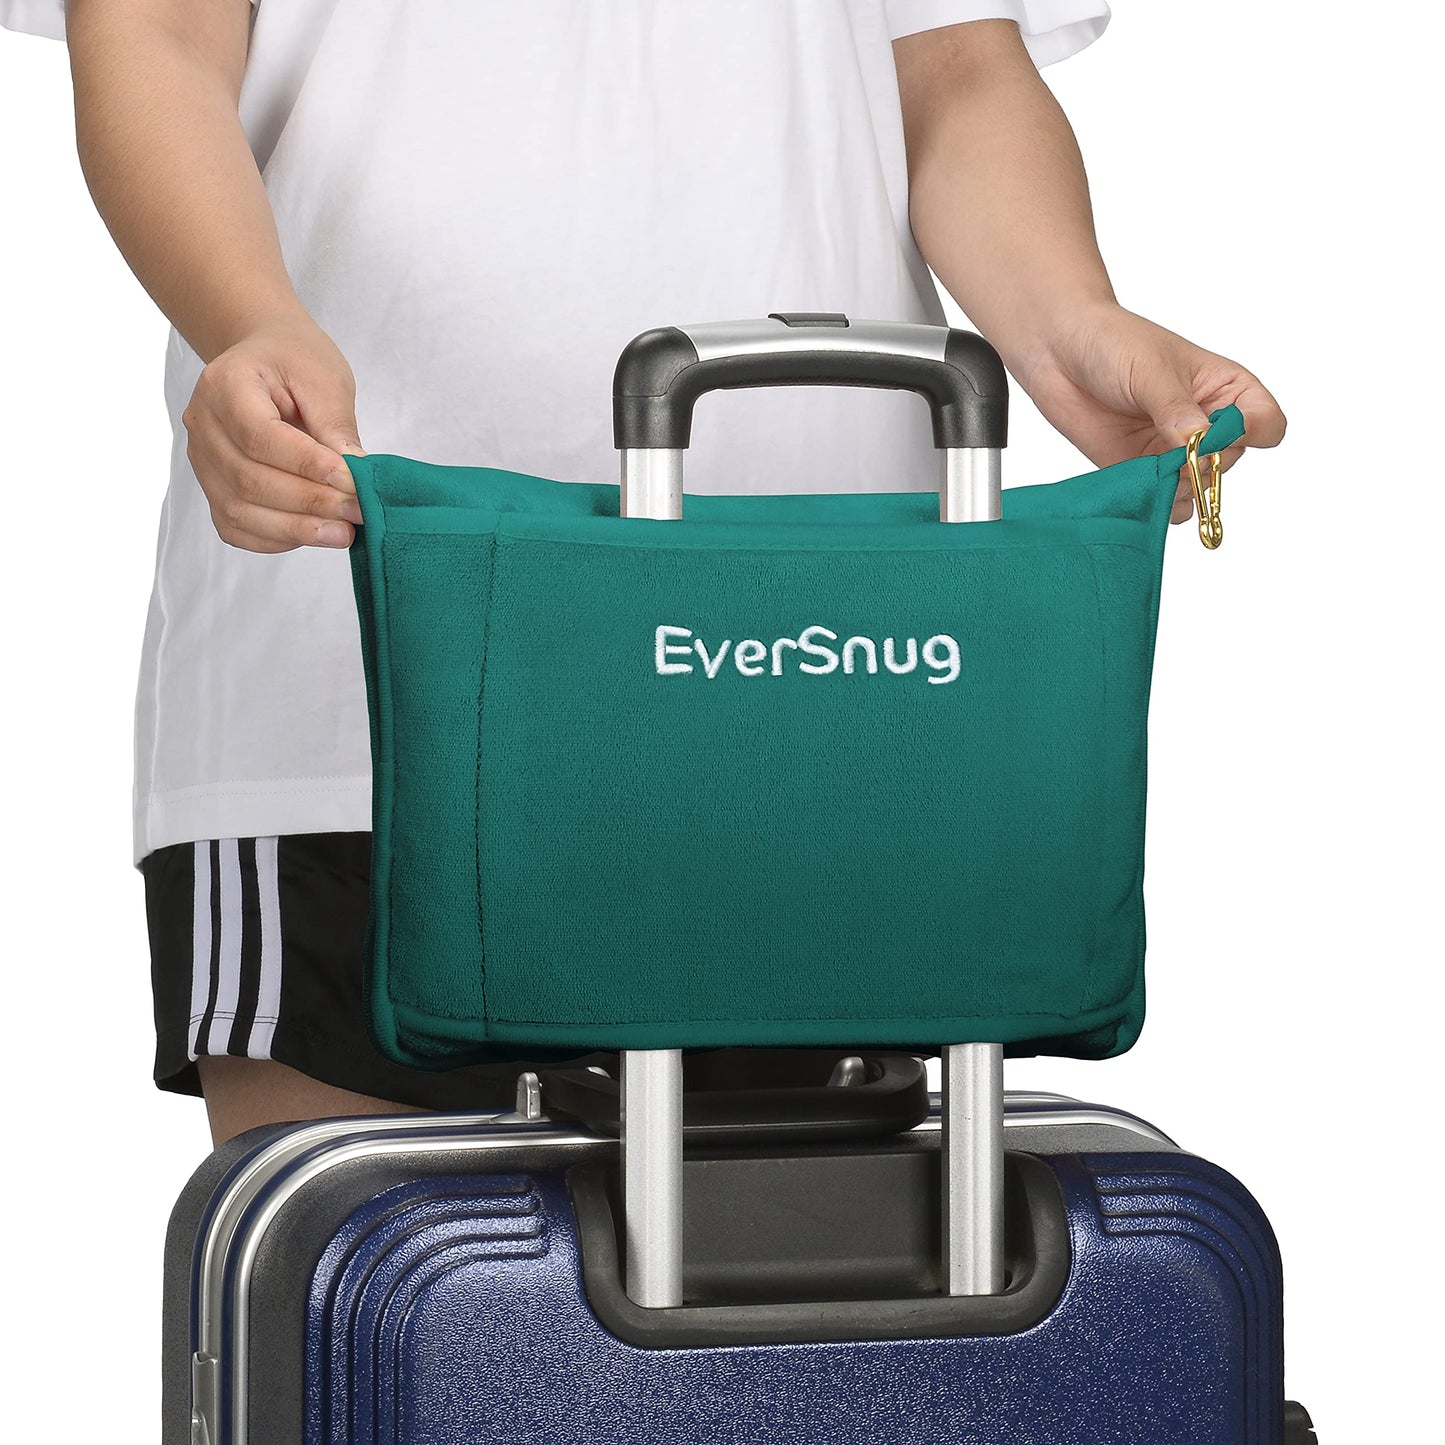 EverSnug Travel Blanket and Pillow - Premium Soft 2 in 1 Airplane Blanket with Soft Bag Pillowcase, Hand Luggage Sleeve and Backpack Clip (Teal)